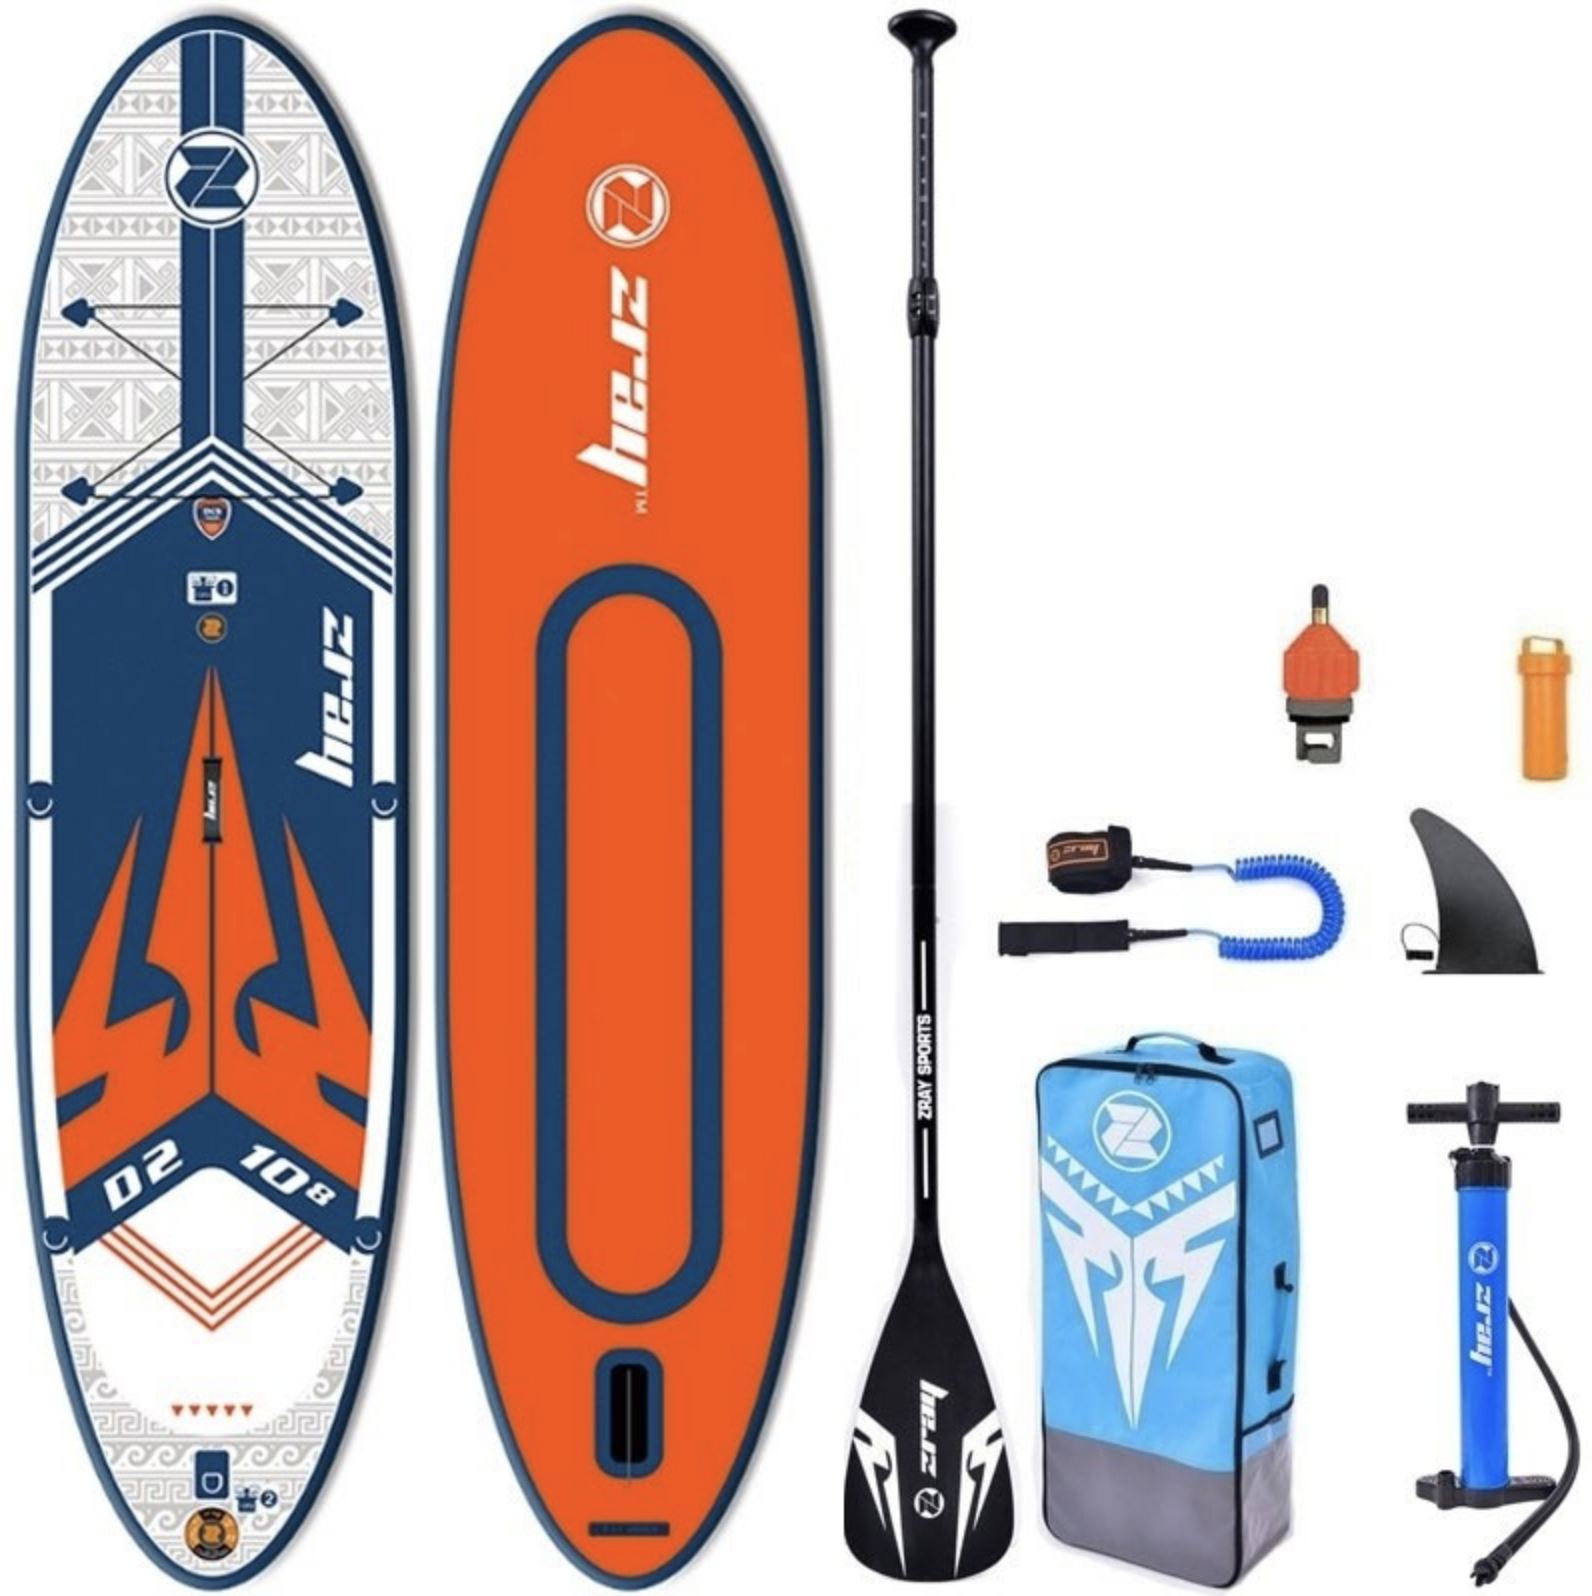 Zray D1 – Bicamera 10’ – Stand up paddle 305x81x15cm